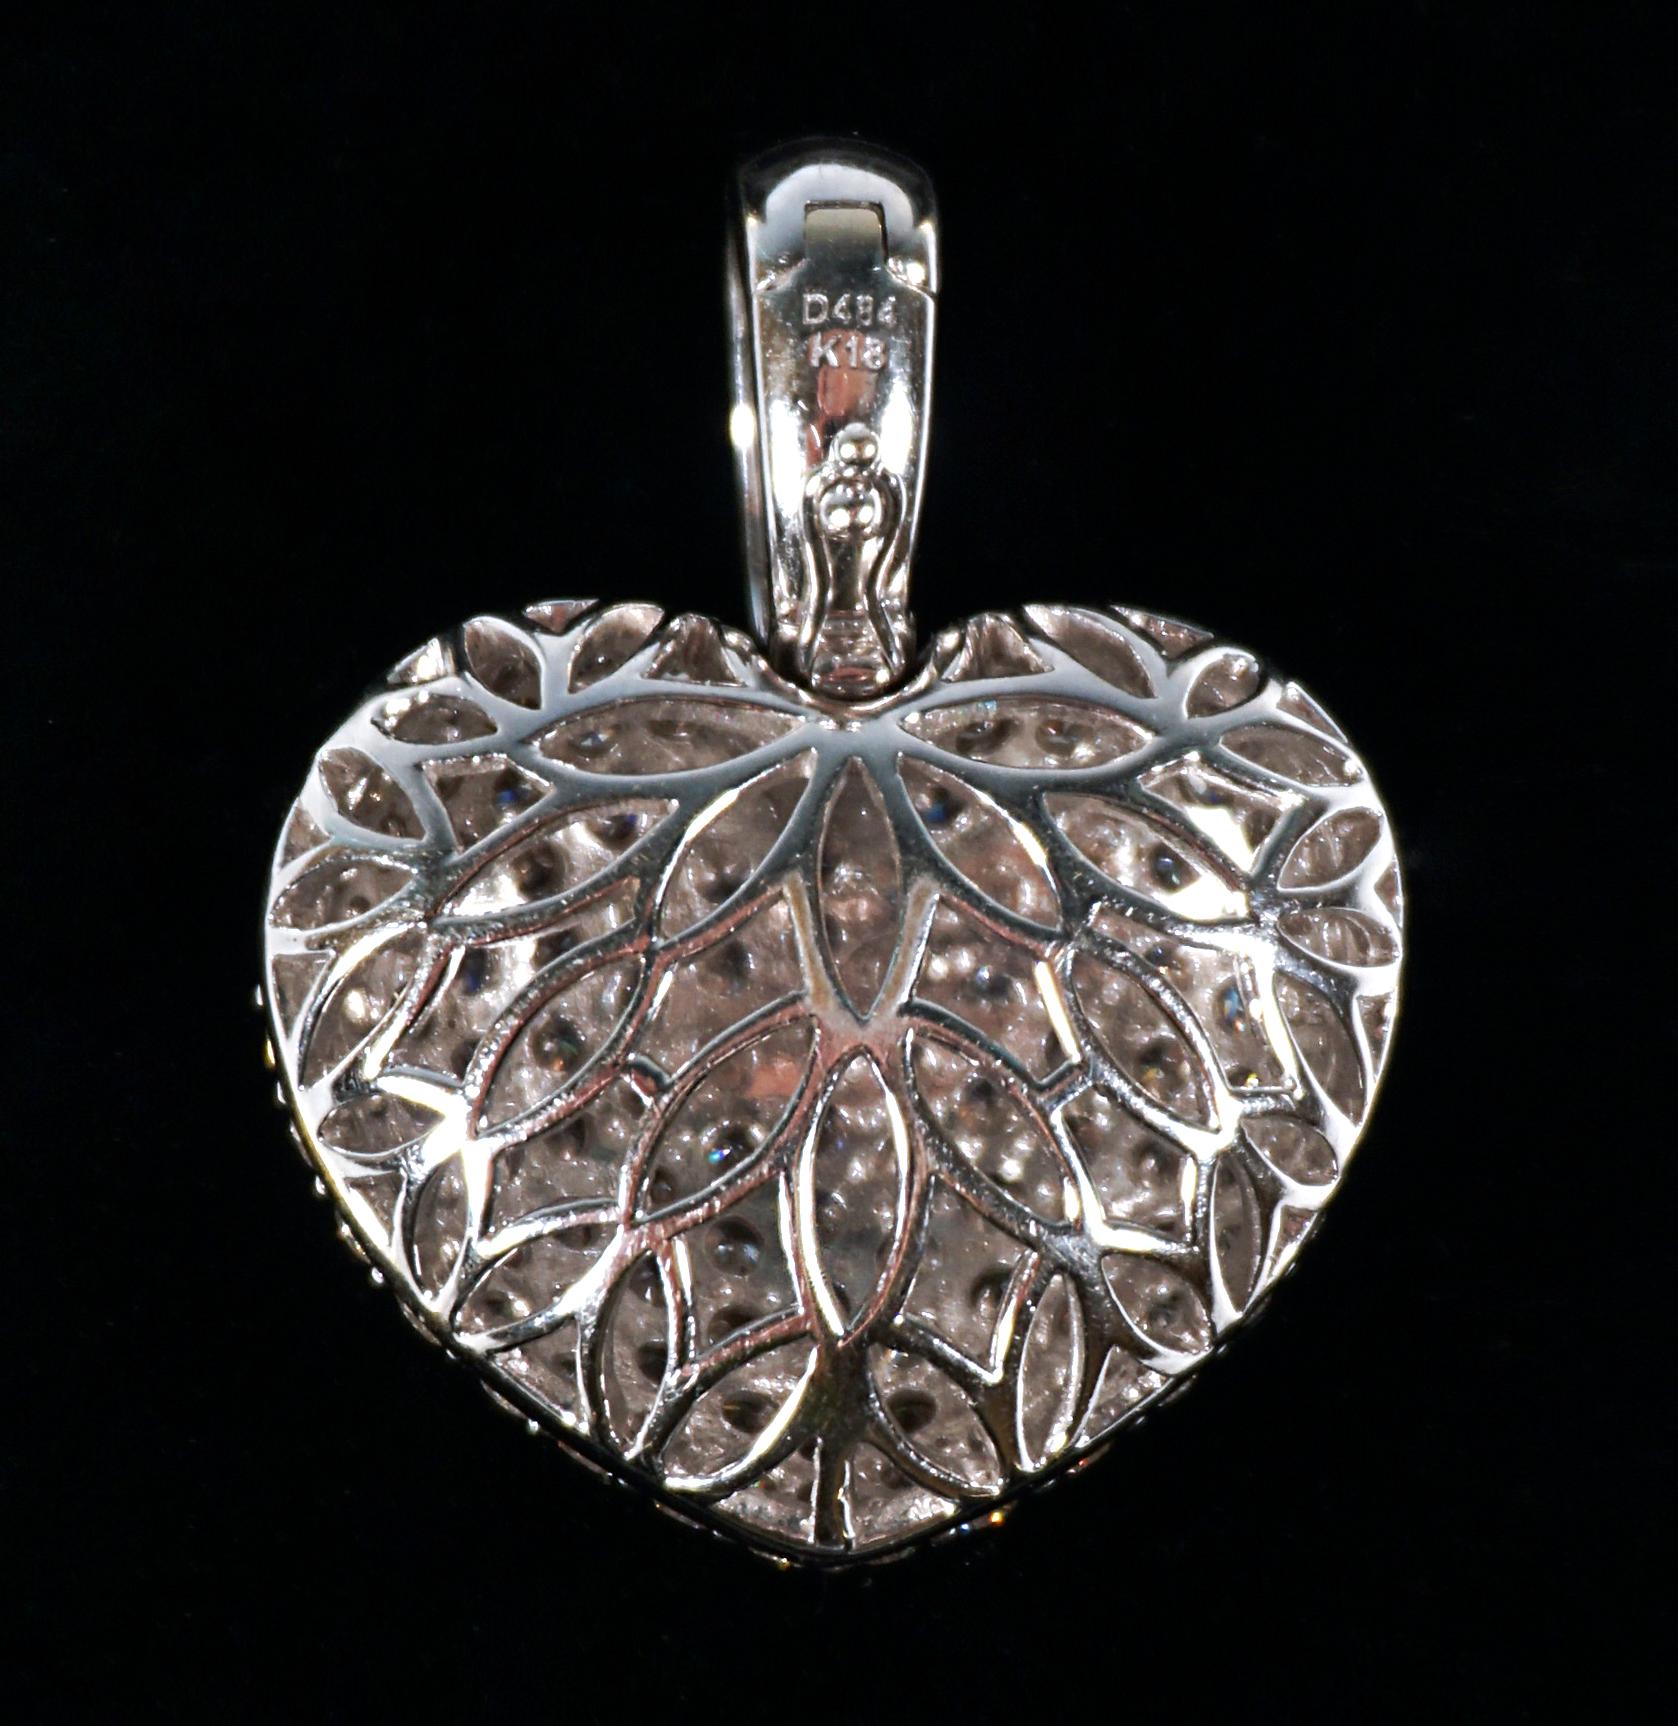 Heart-Shaped Pendant Clip With Numerous Diamonds 4.85 ct White Gold 18k For Sale 1